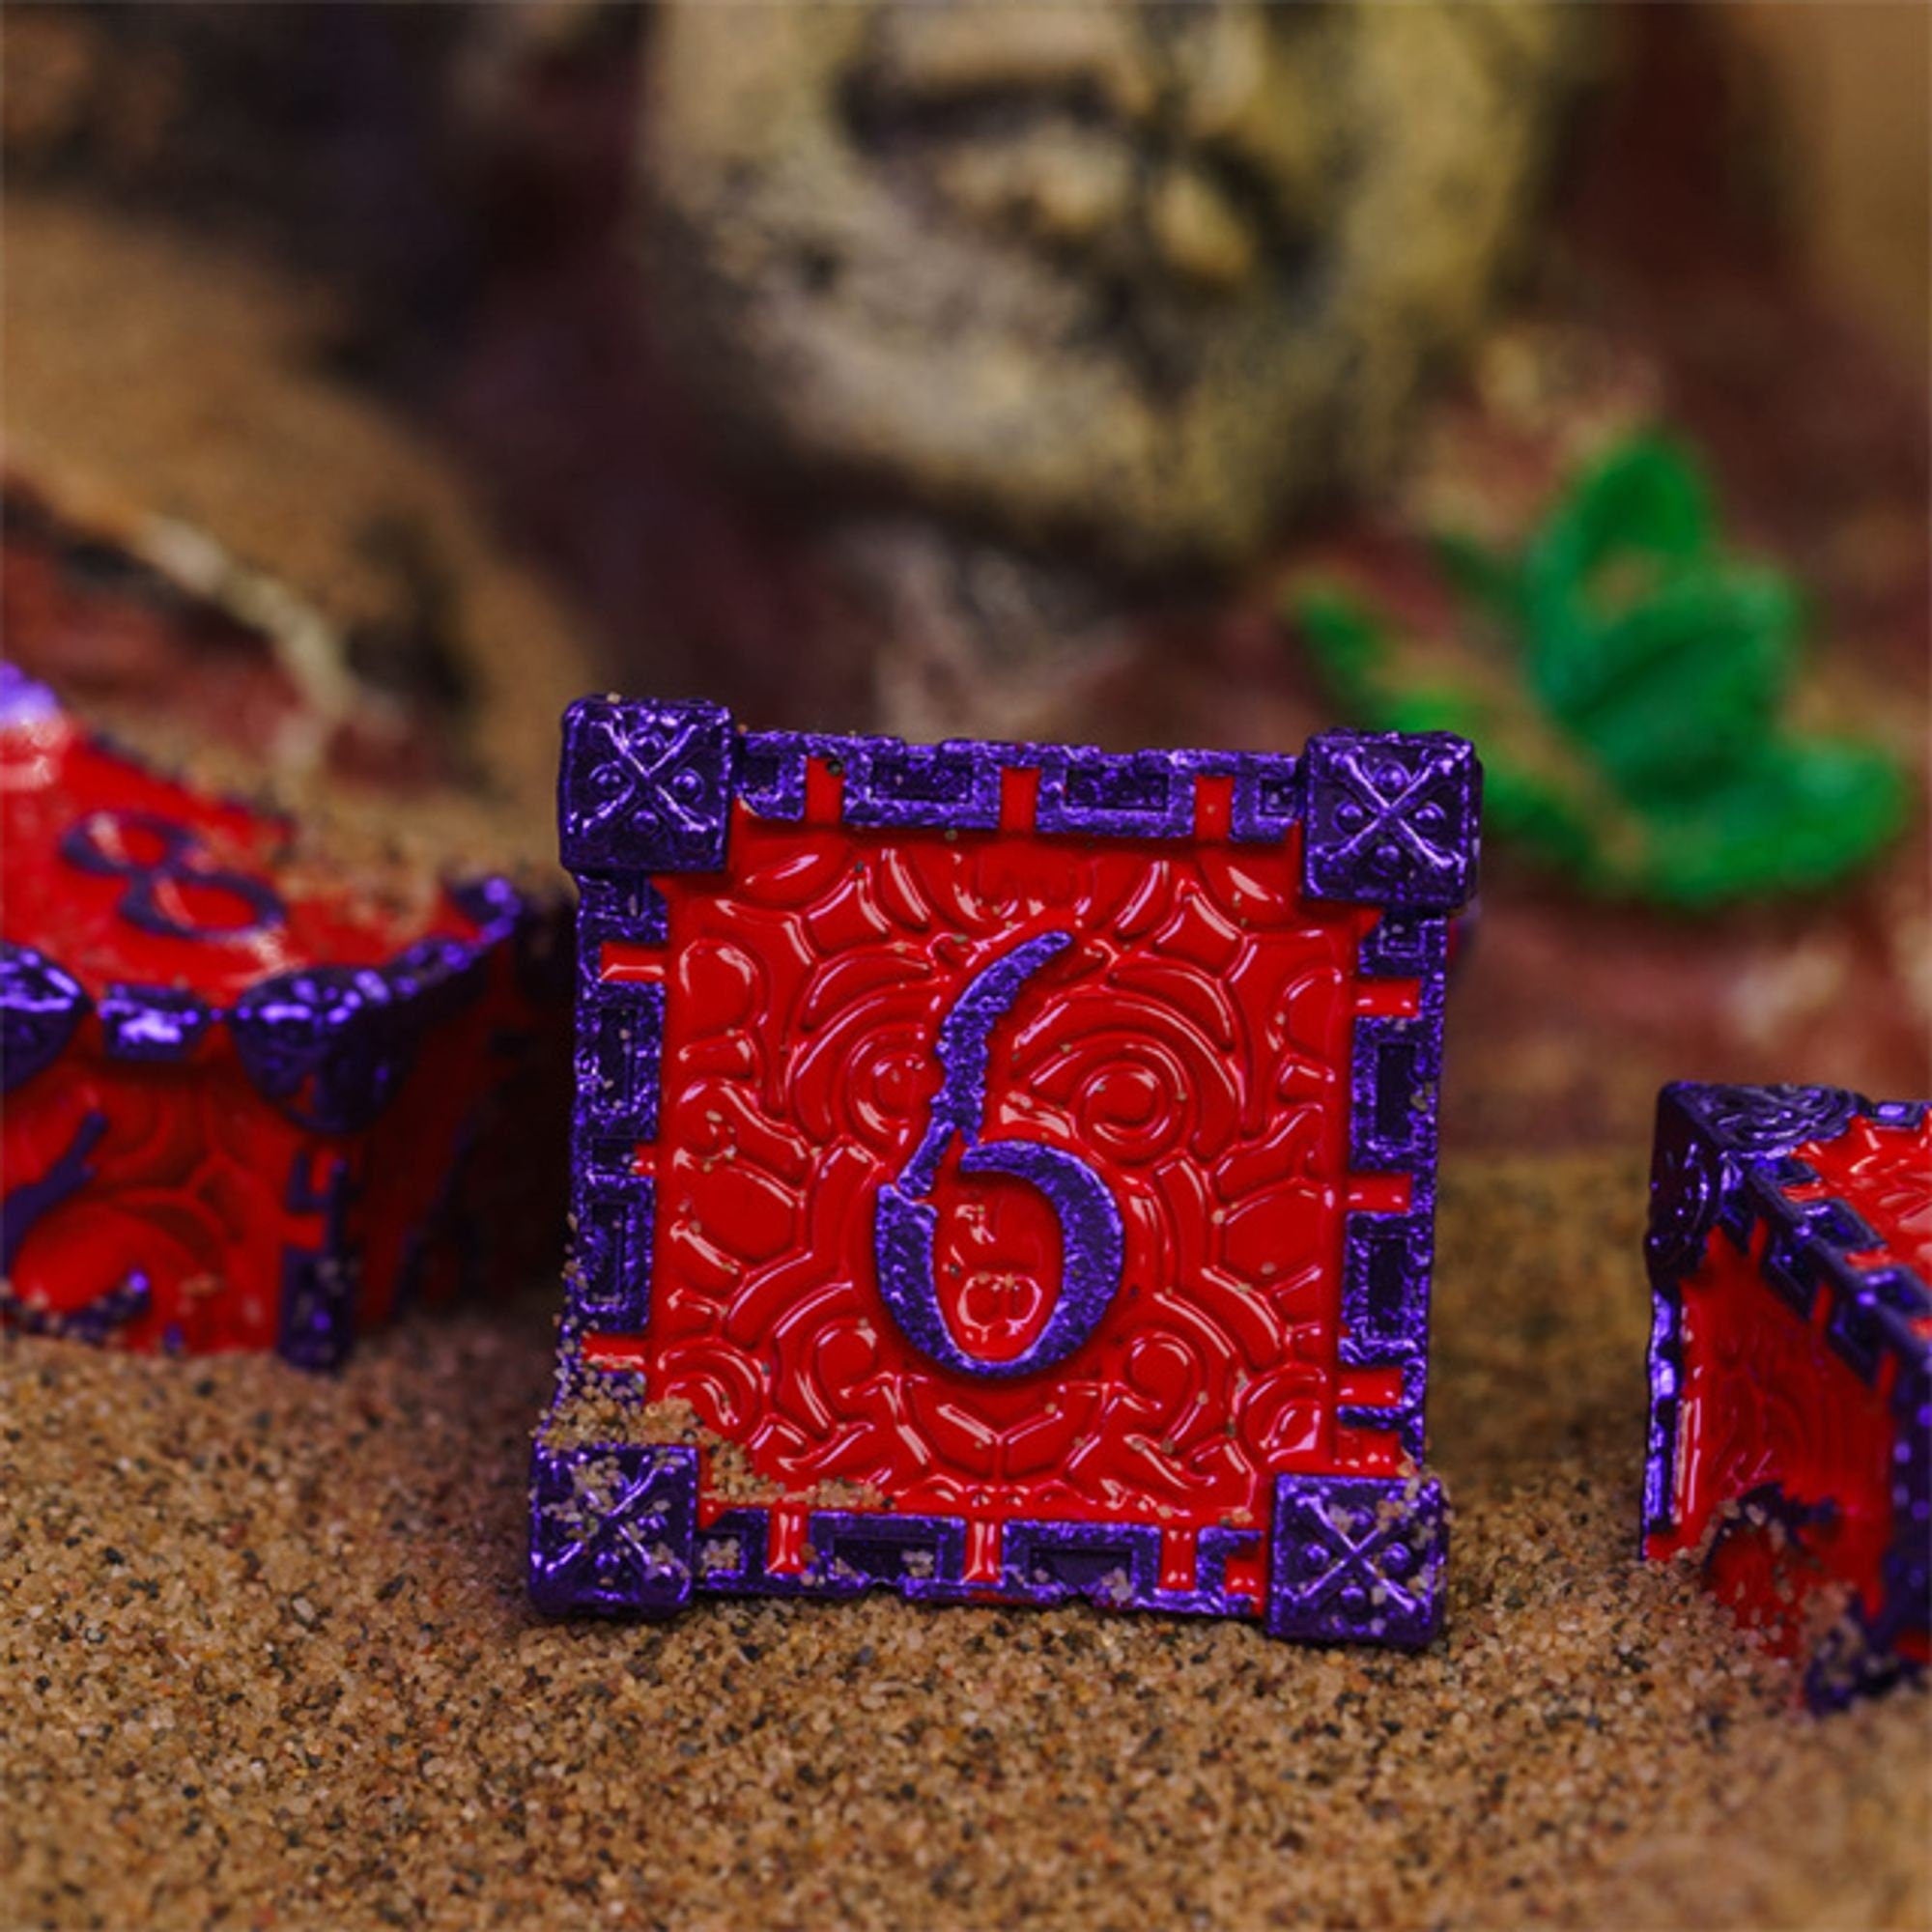 Dagger of Venom Royal Purple and Red Metal Rogue Style DND/TTRPG Dice set - Dicemaniac